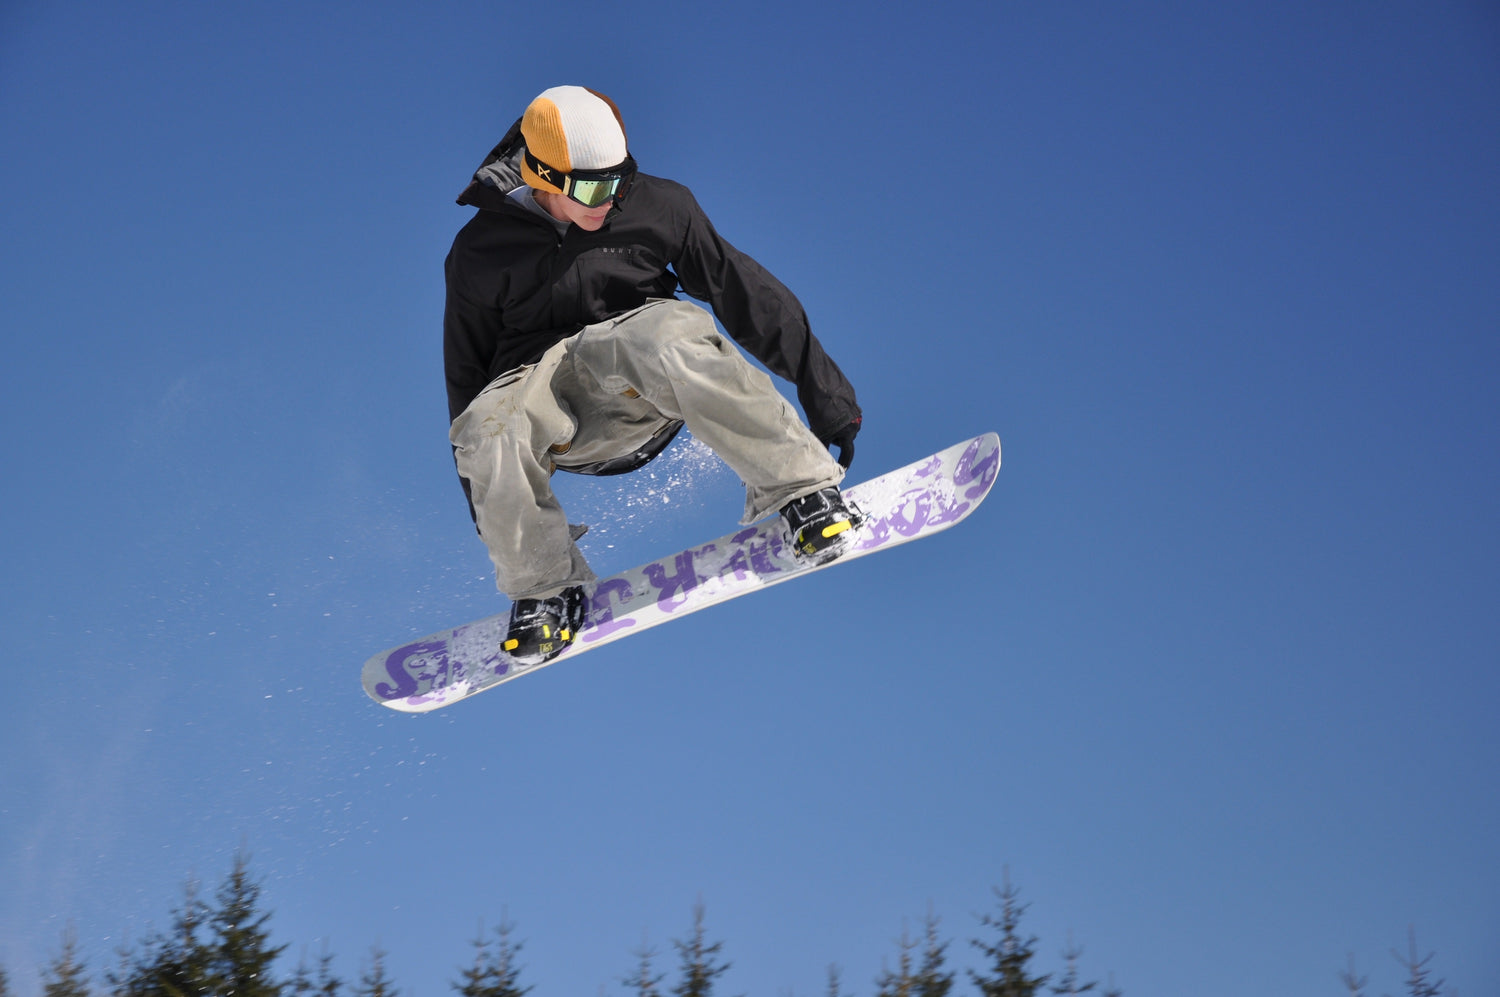 Snowboarding For Beginners [An Epic Guide]